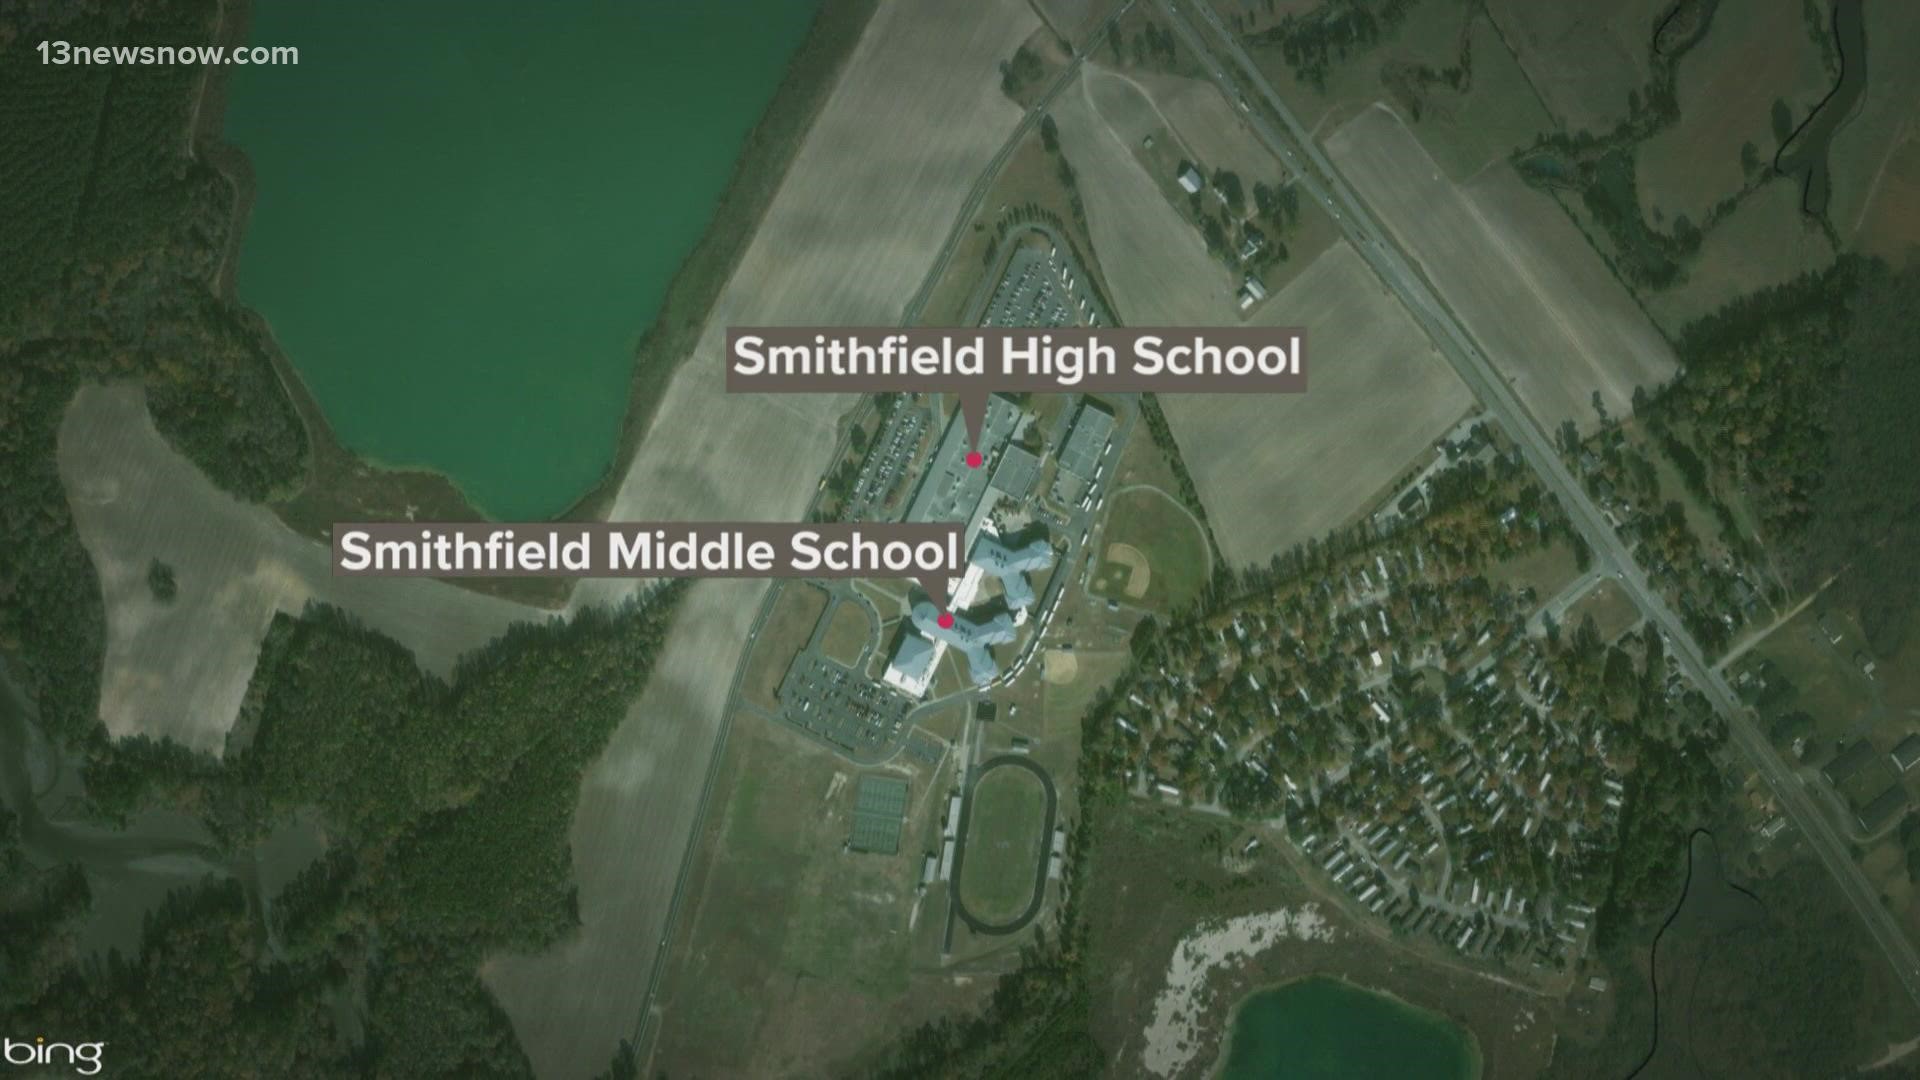 Isle of Wight County Sheriff's deputies were at Smithfield High School and Smithfield Middle School Friday after someone made a bomb threat against the high school.